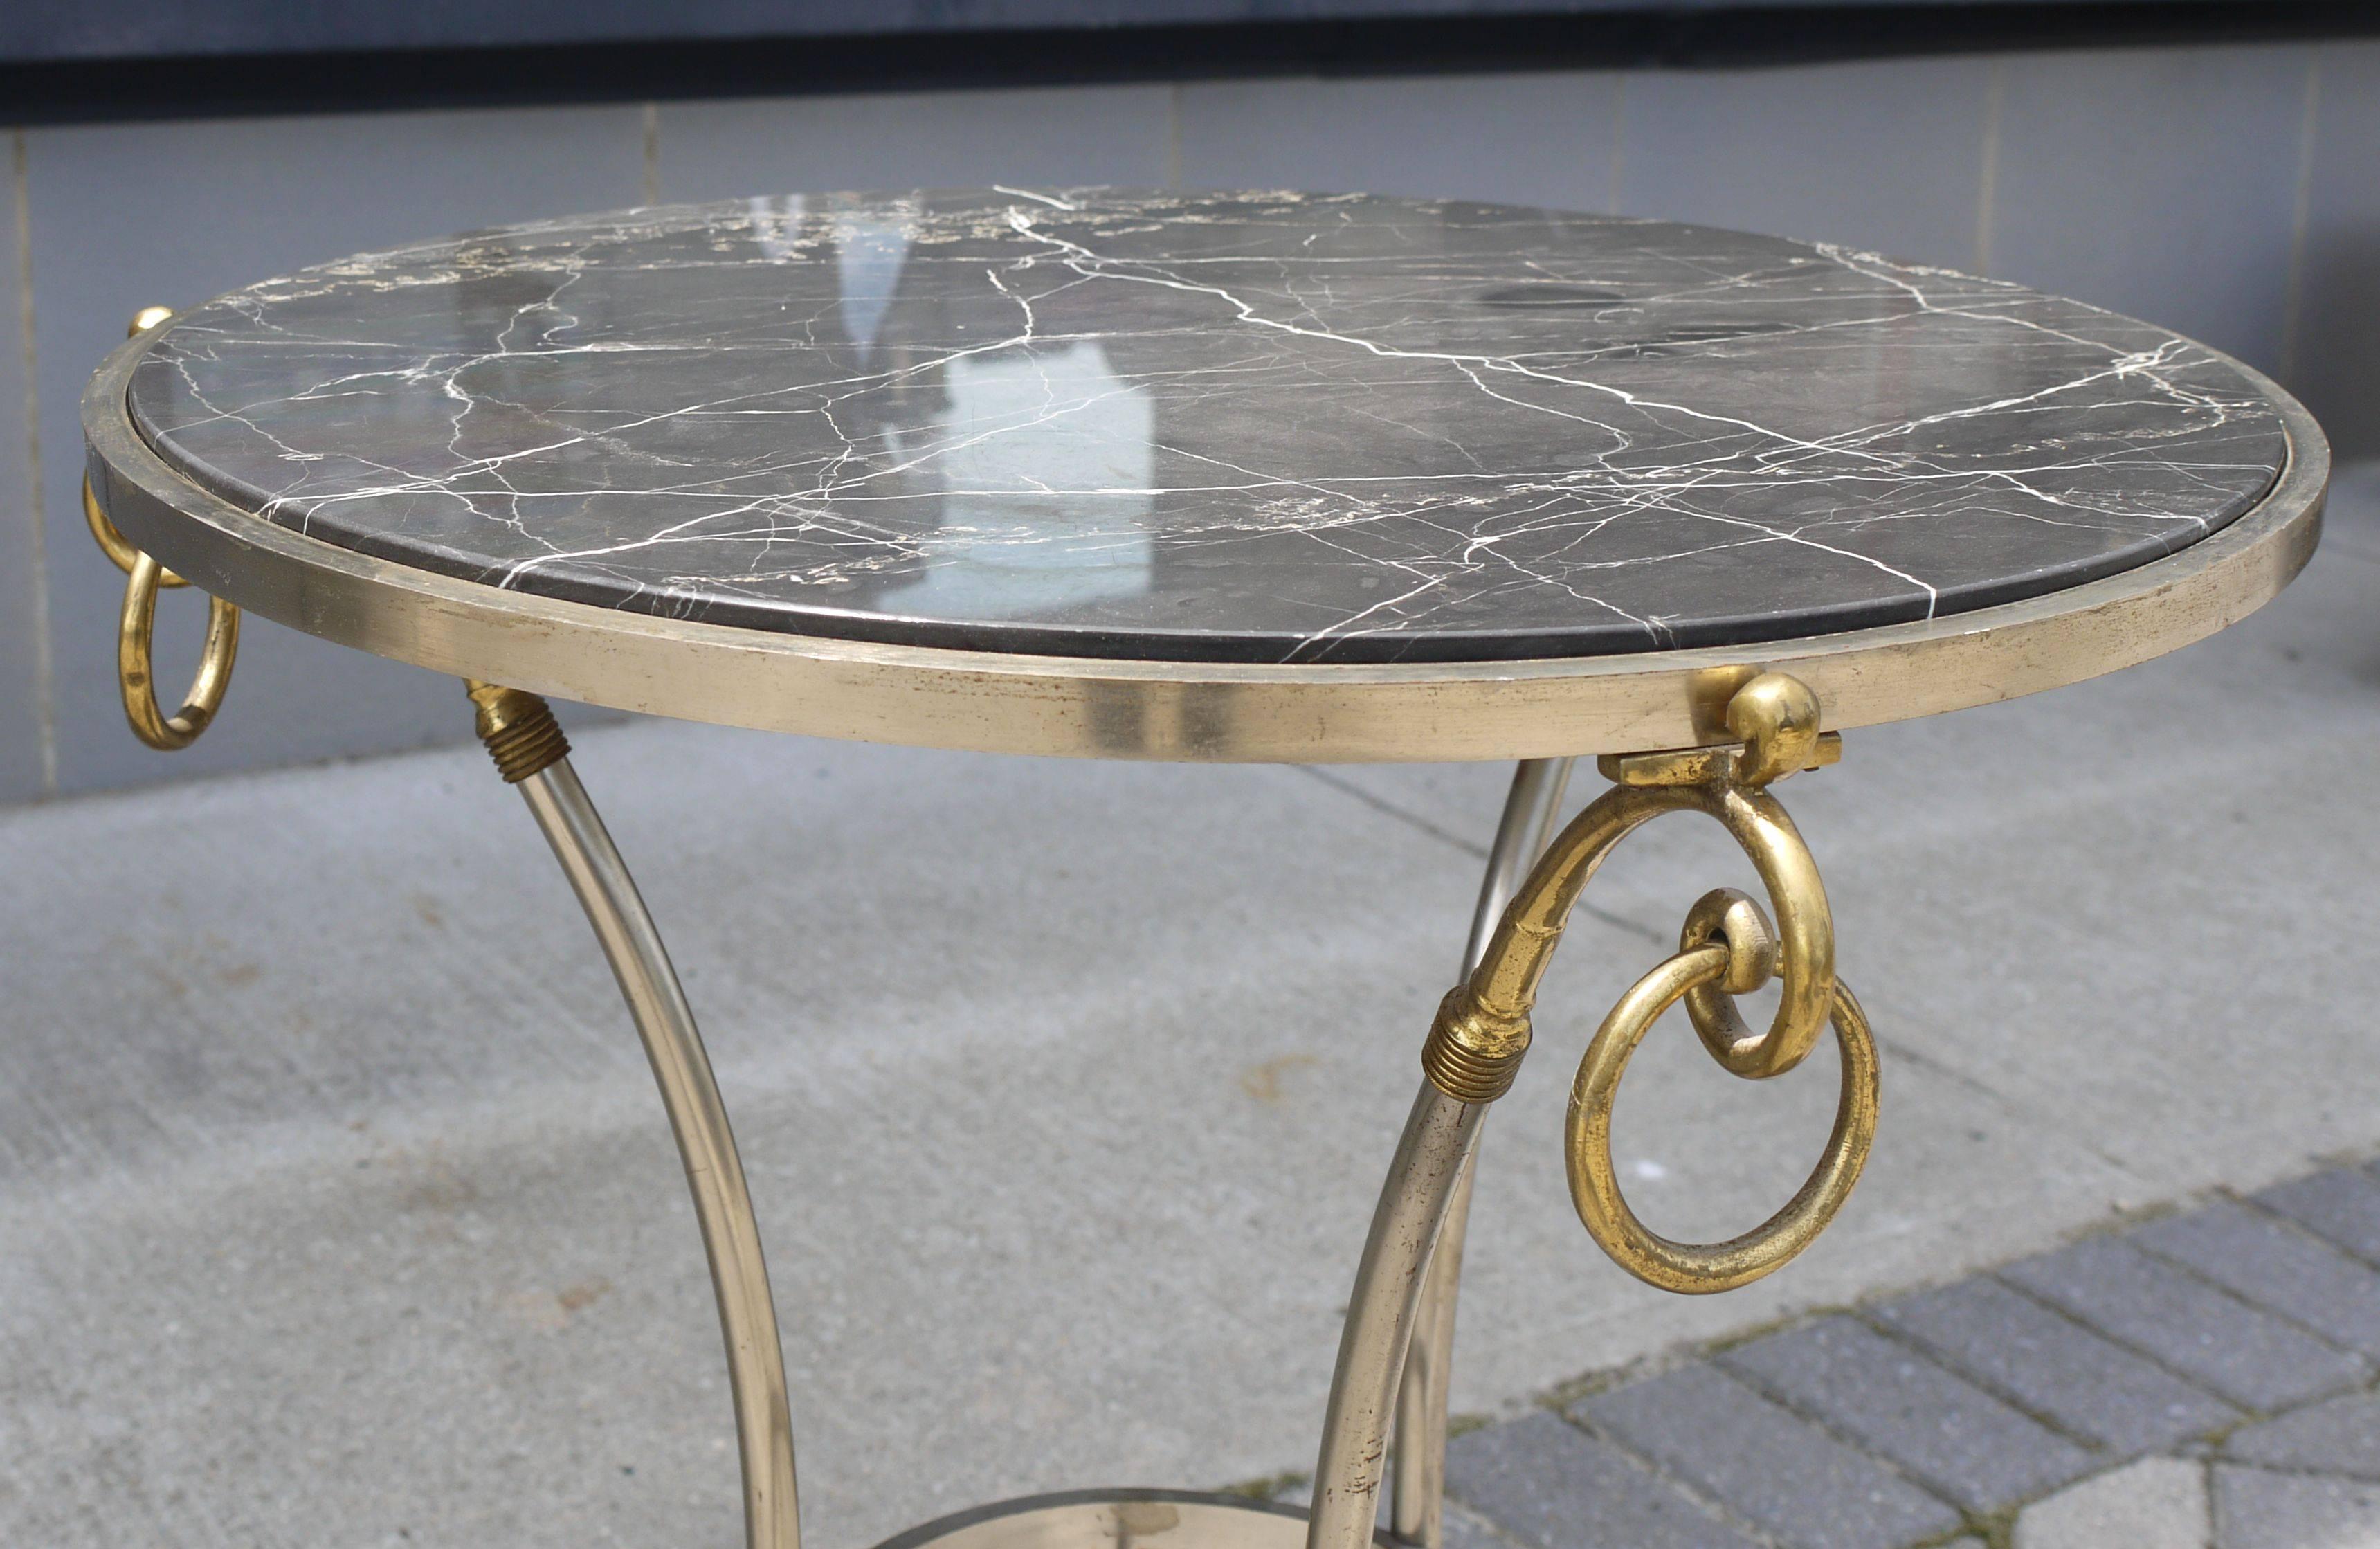 Mid-20th Century Neoclassical Italian Tripod Table in Brushed Nickel and Brass